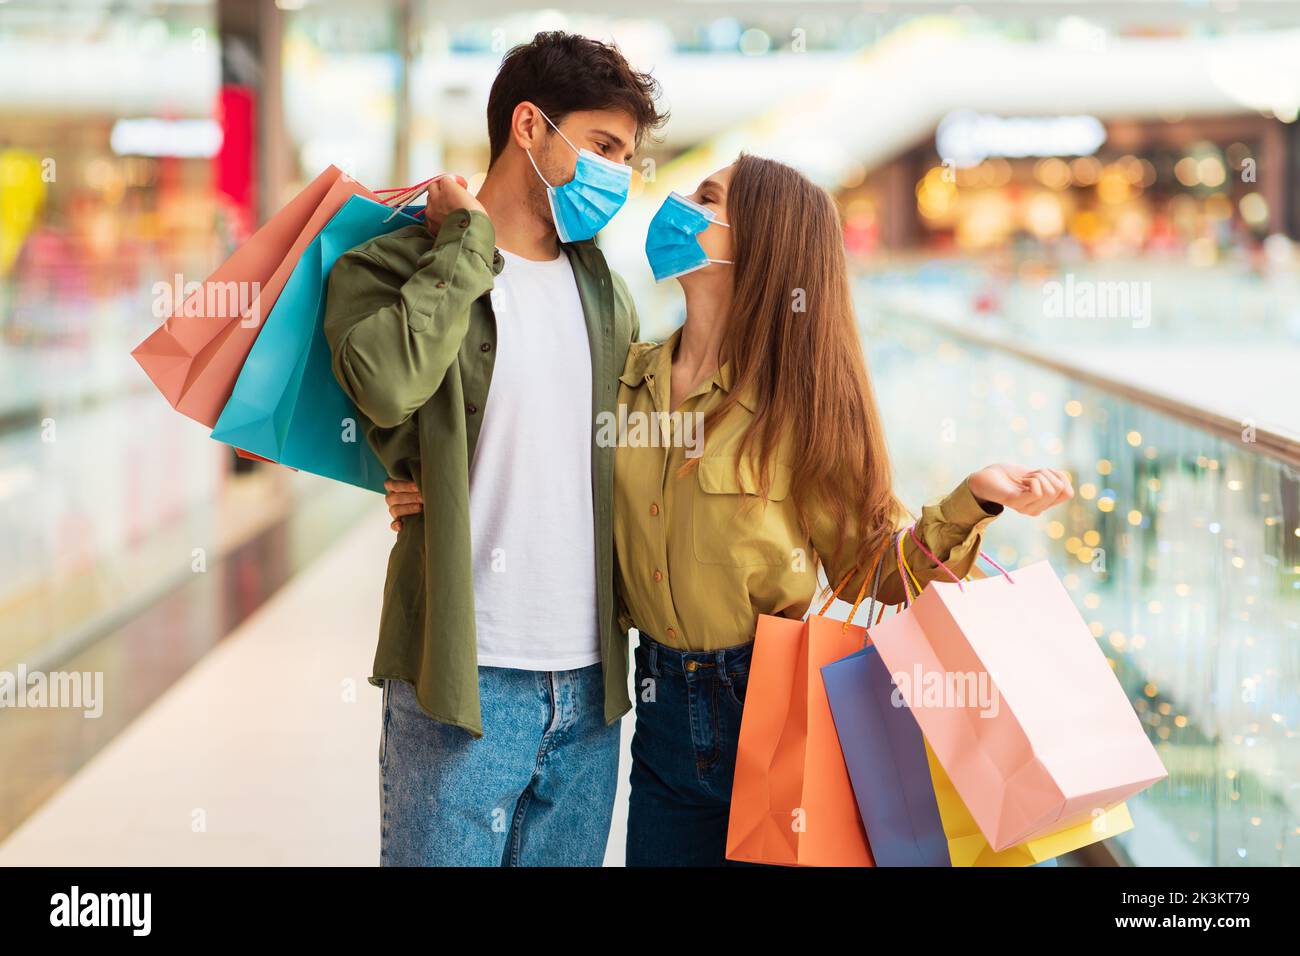 Couple Embracing Shopping Together Wearing Face Masks Standing In Hypermarket Stock Photo